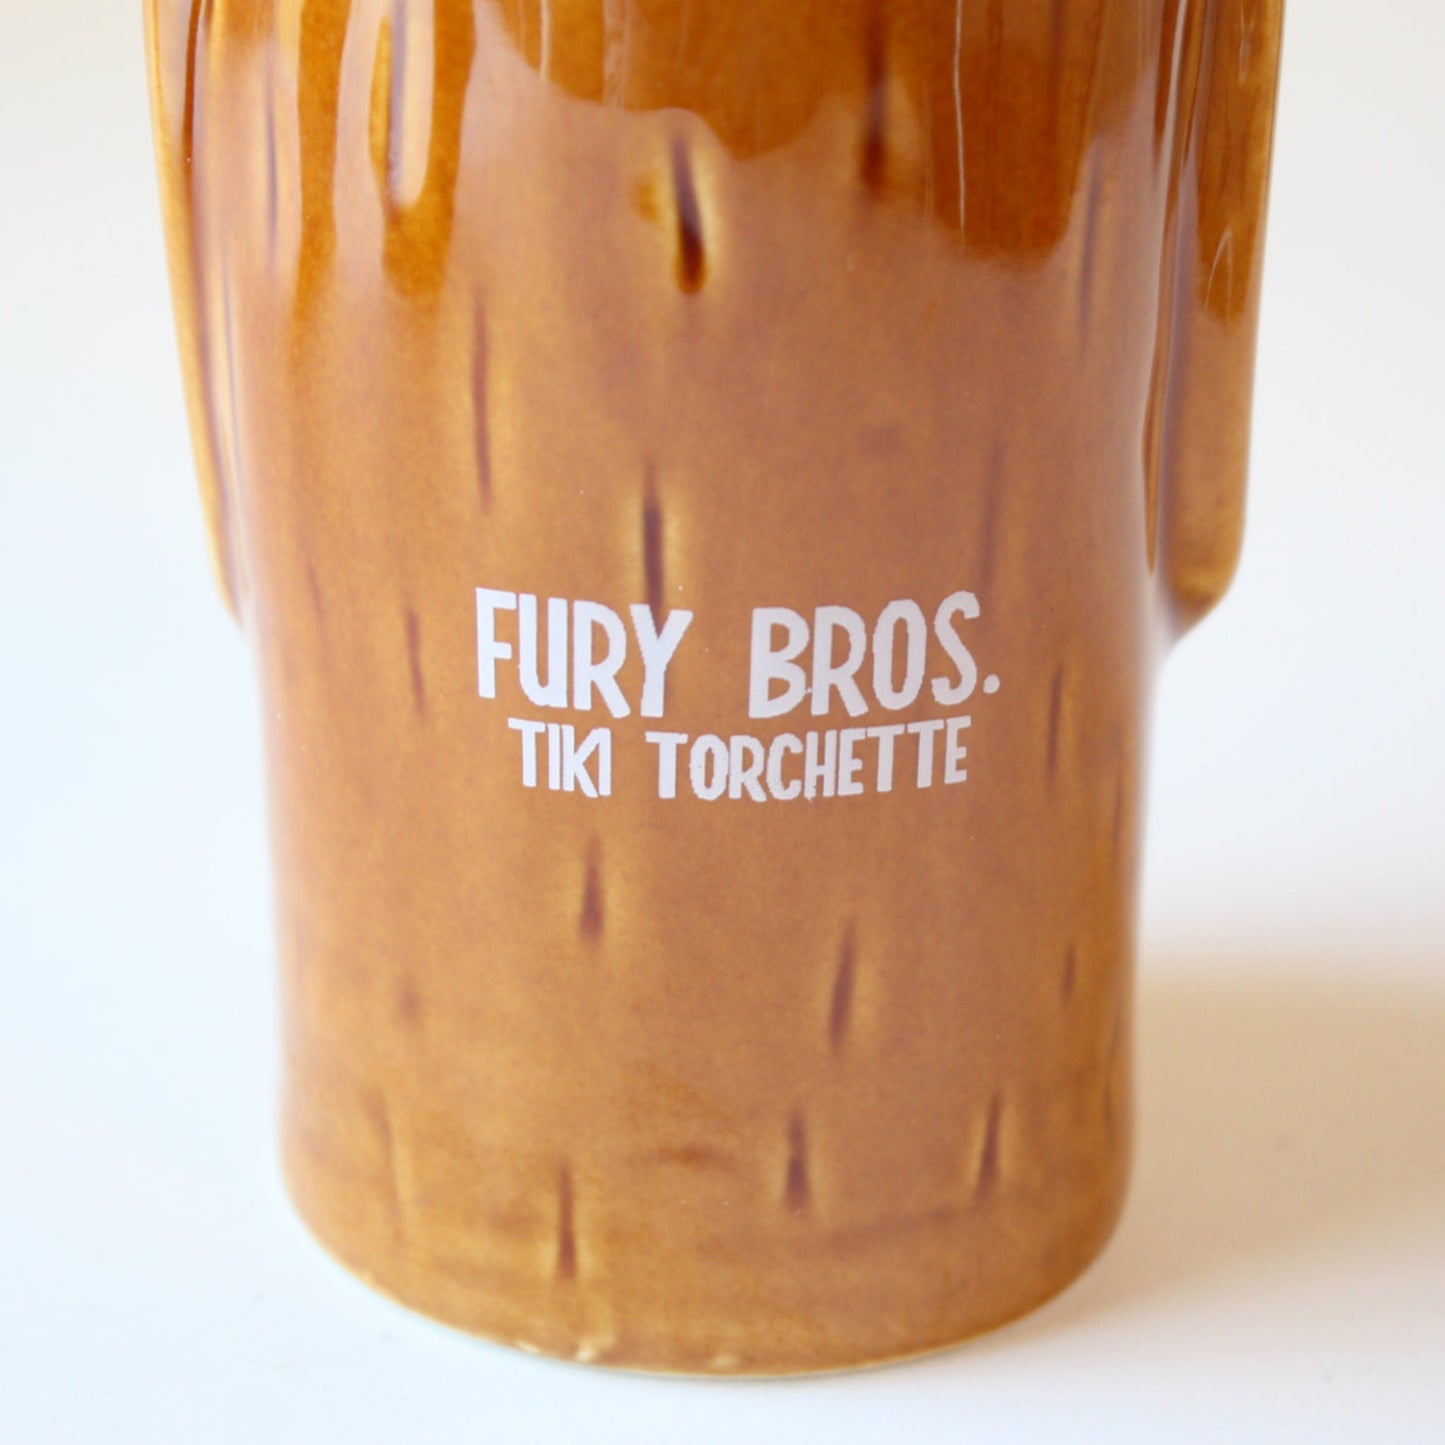 Fury Bros Tiki Torchette - Pele's Punch - Made in the USA